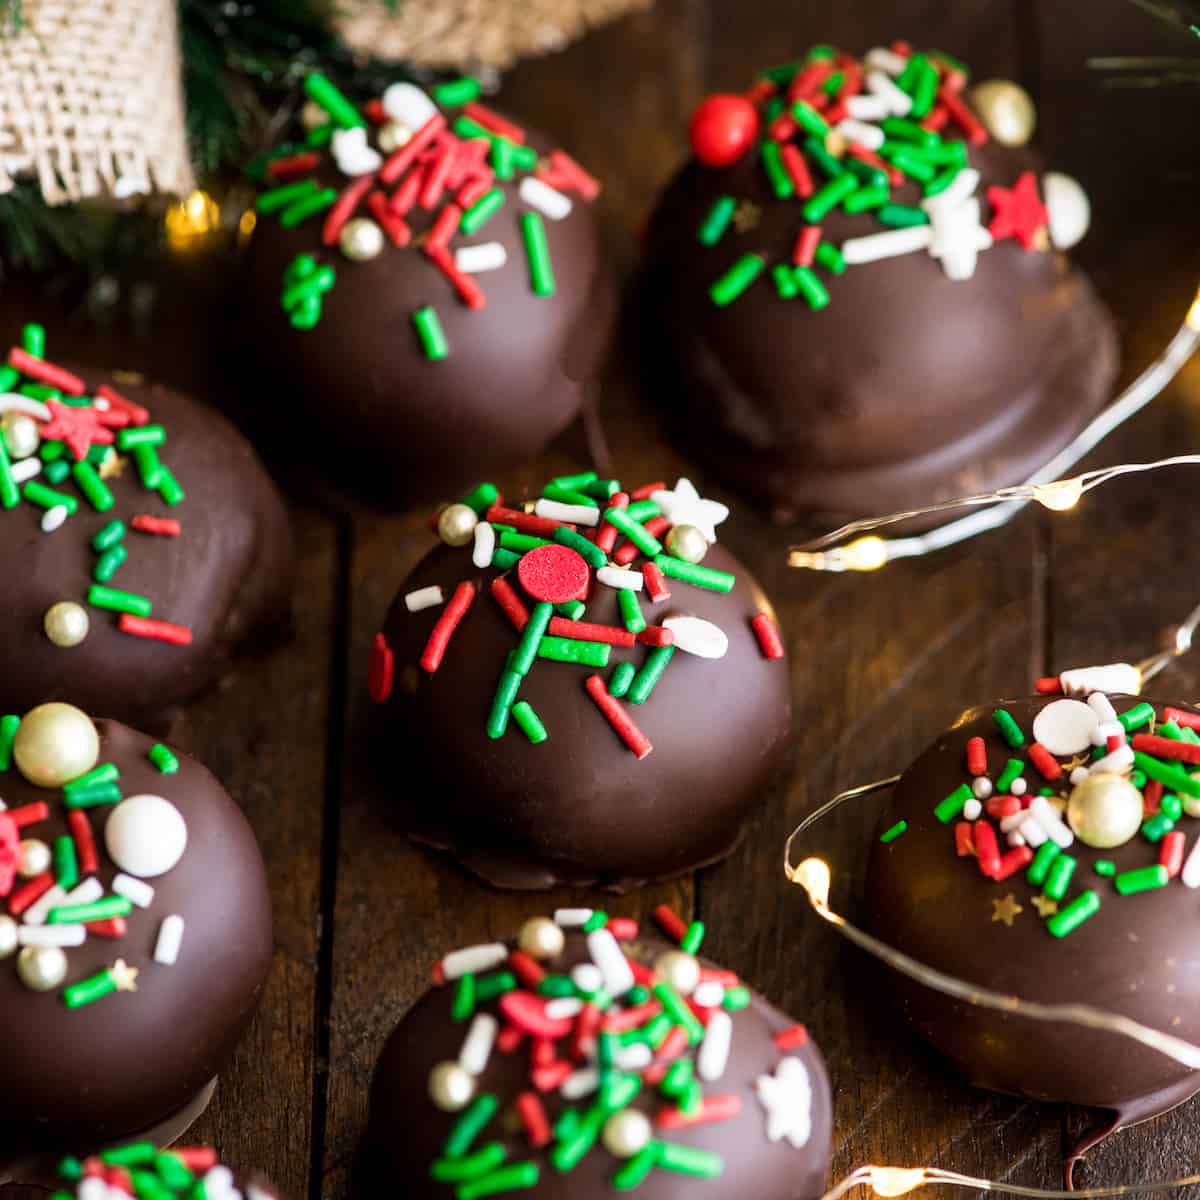 front view of 7 chocolate peanut butter balls with Christmas sprinkles